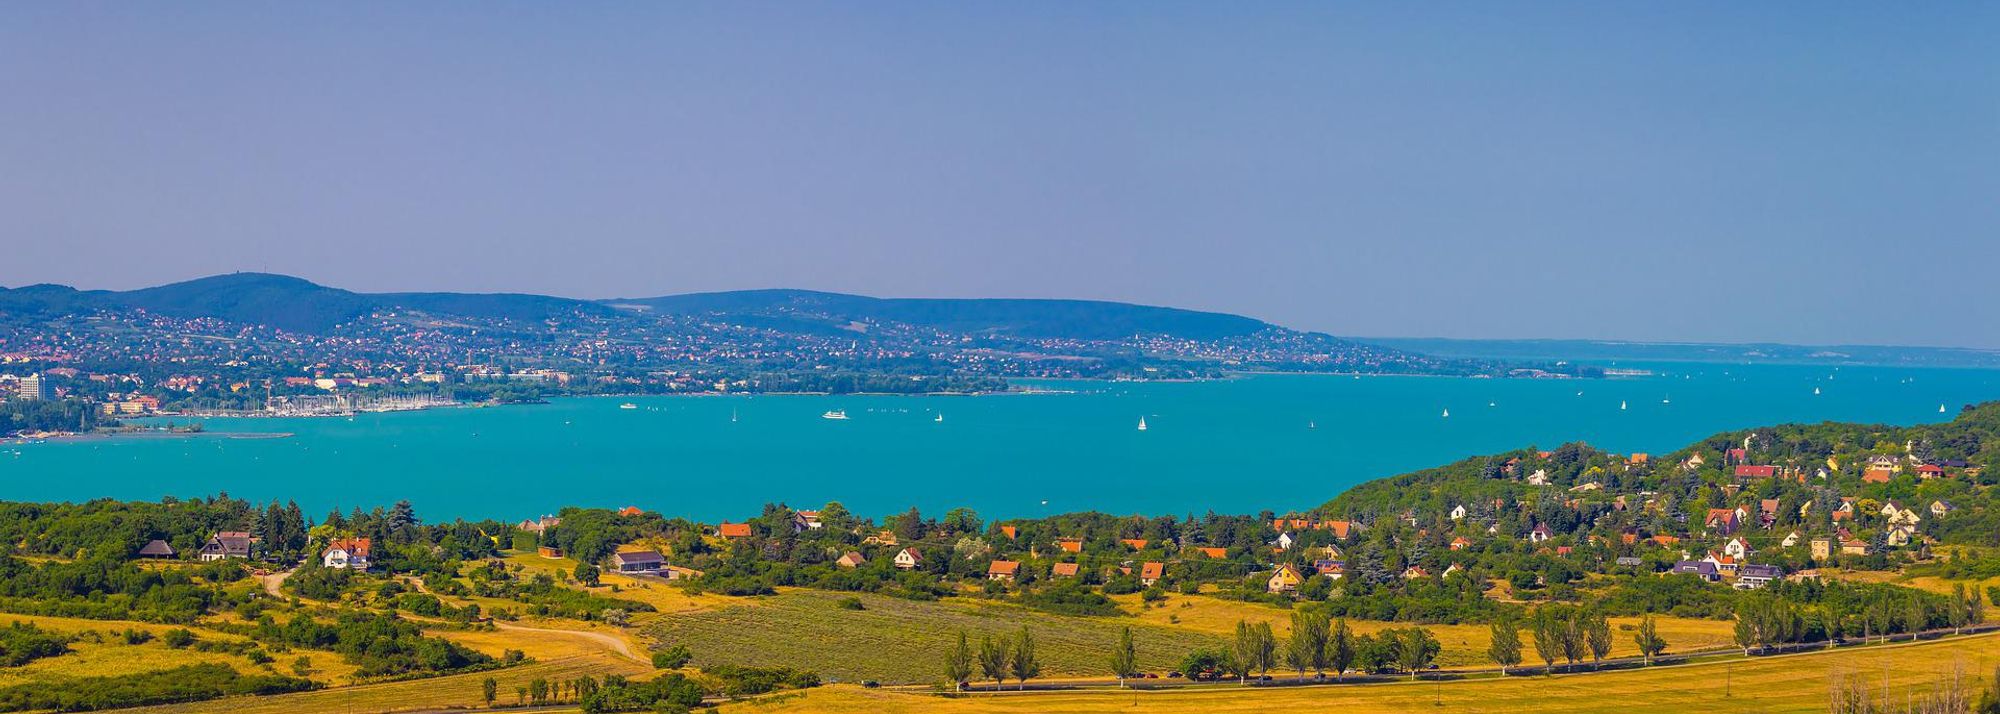 Lake Balaton is a favorite holiday destination for city dwellers.